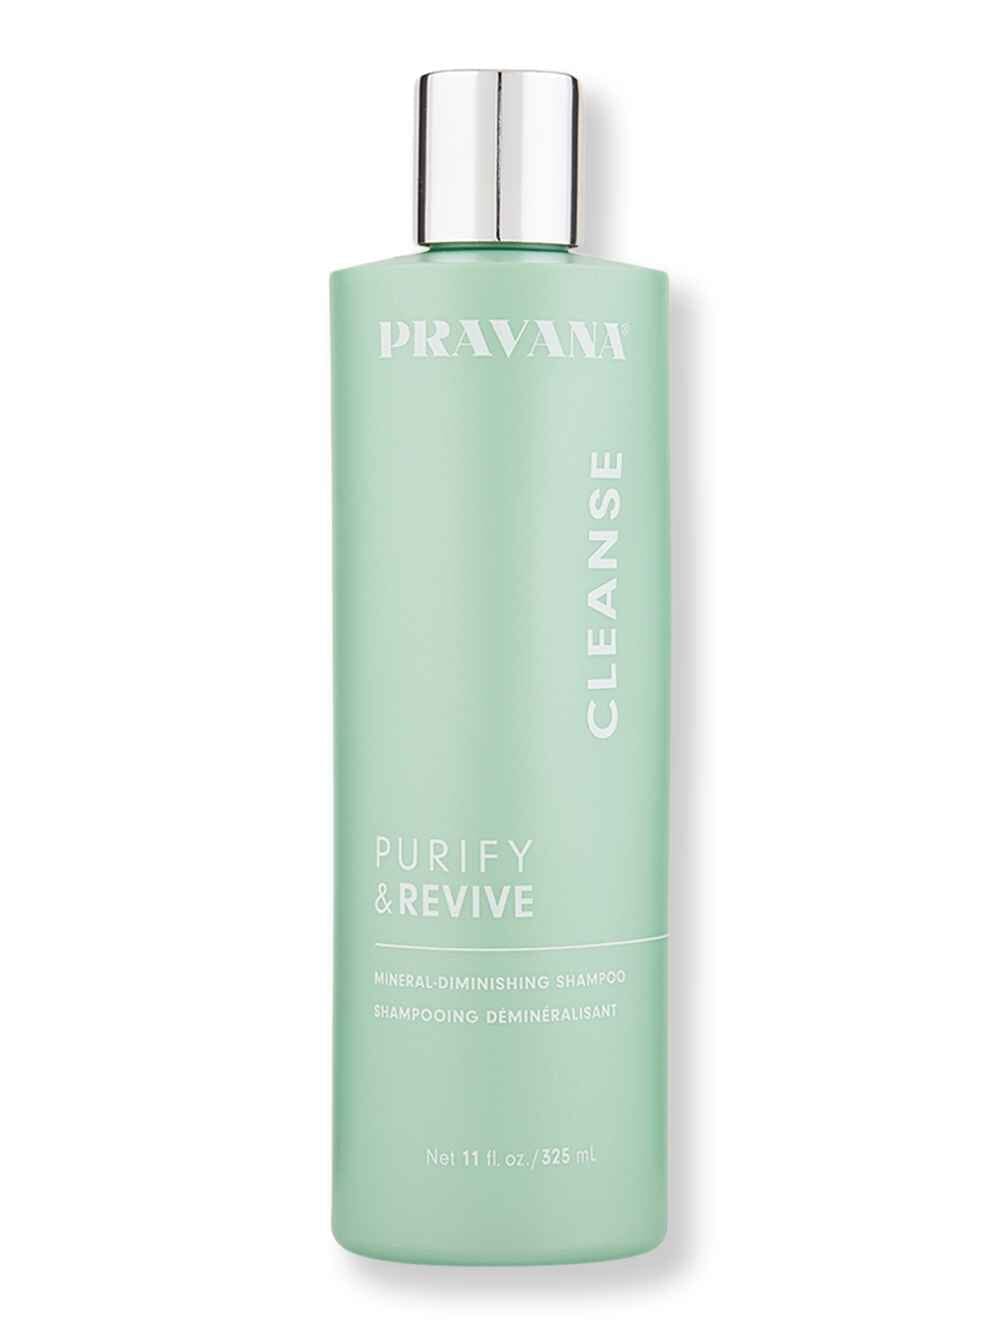 Purify & Revive Demineralizing Shampoo